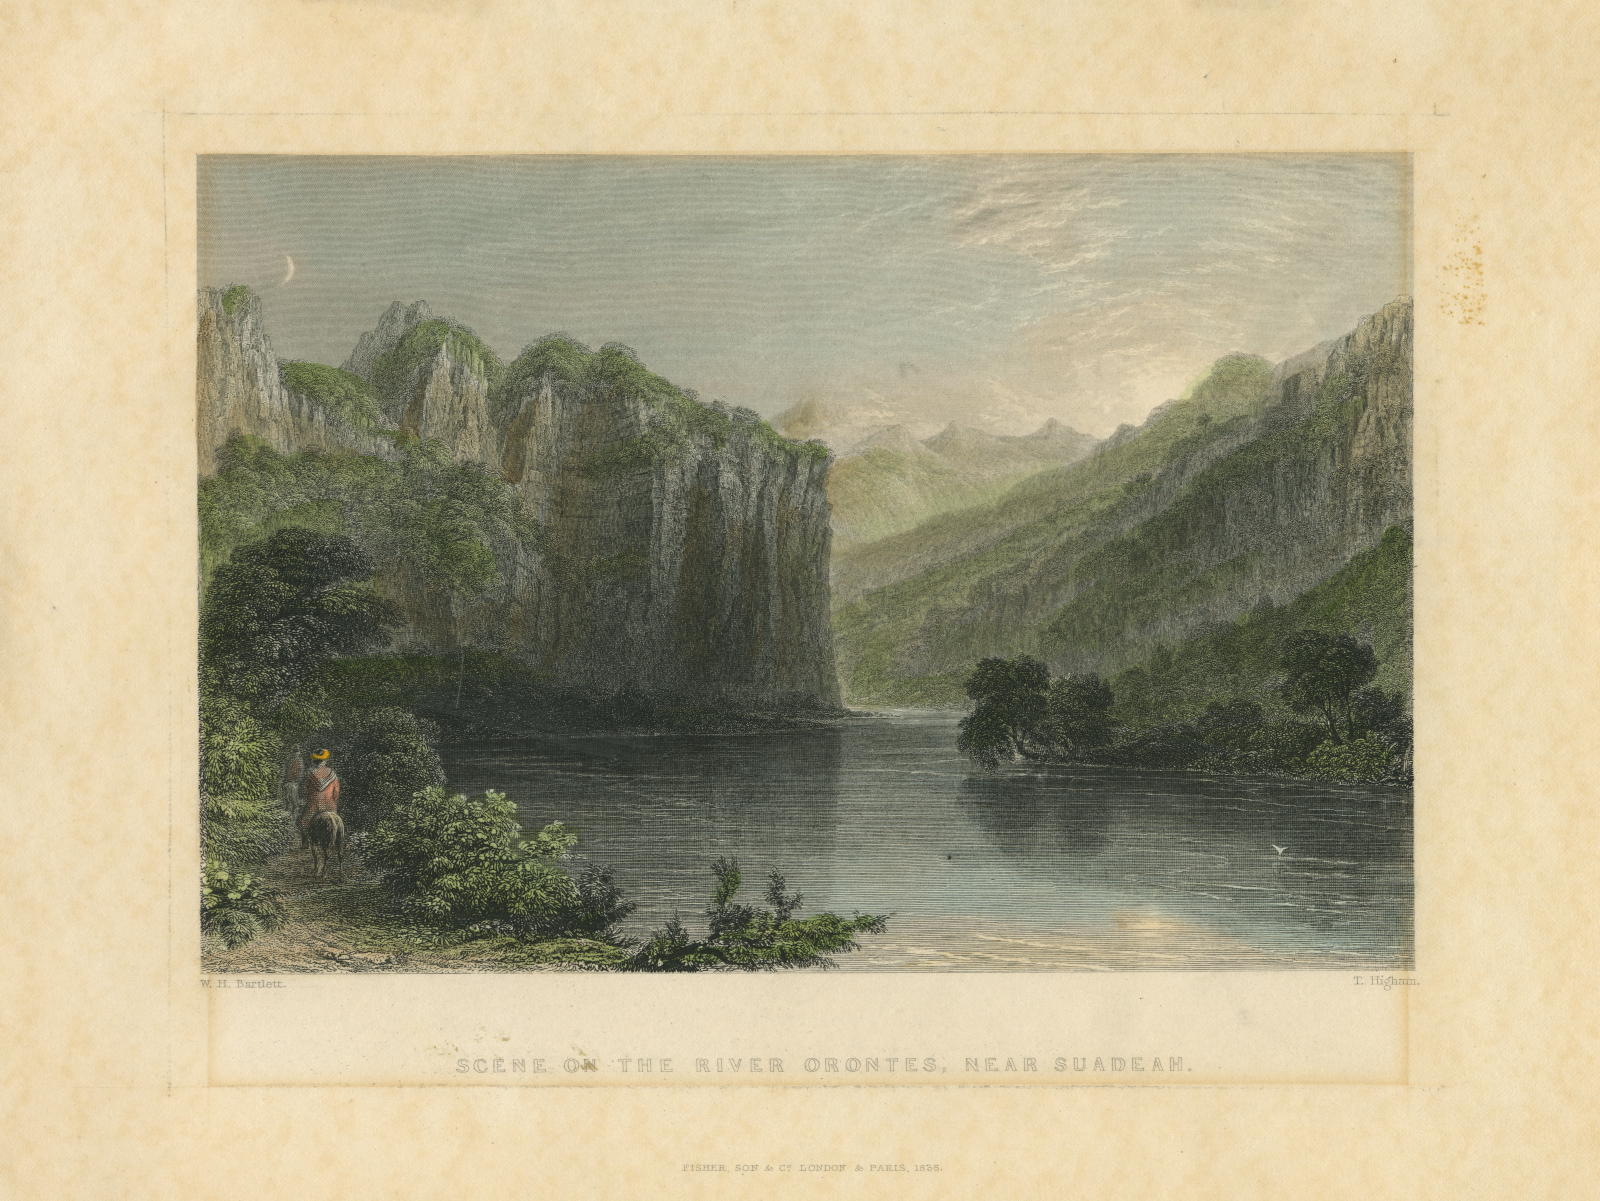 scene on the river oronthes